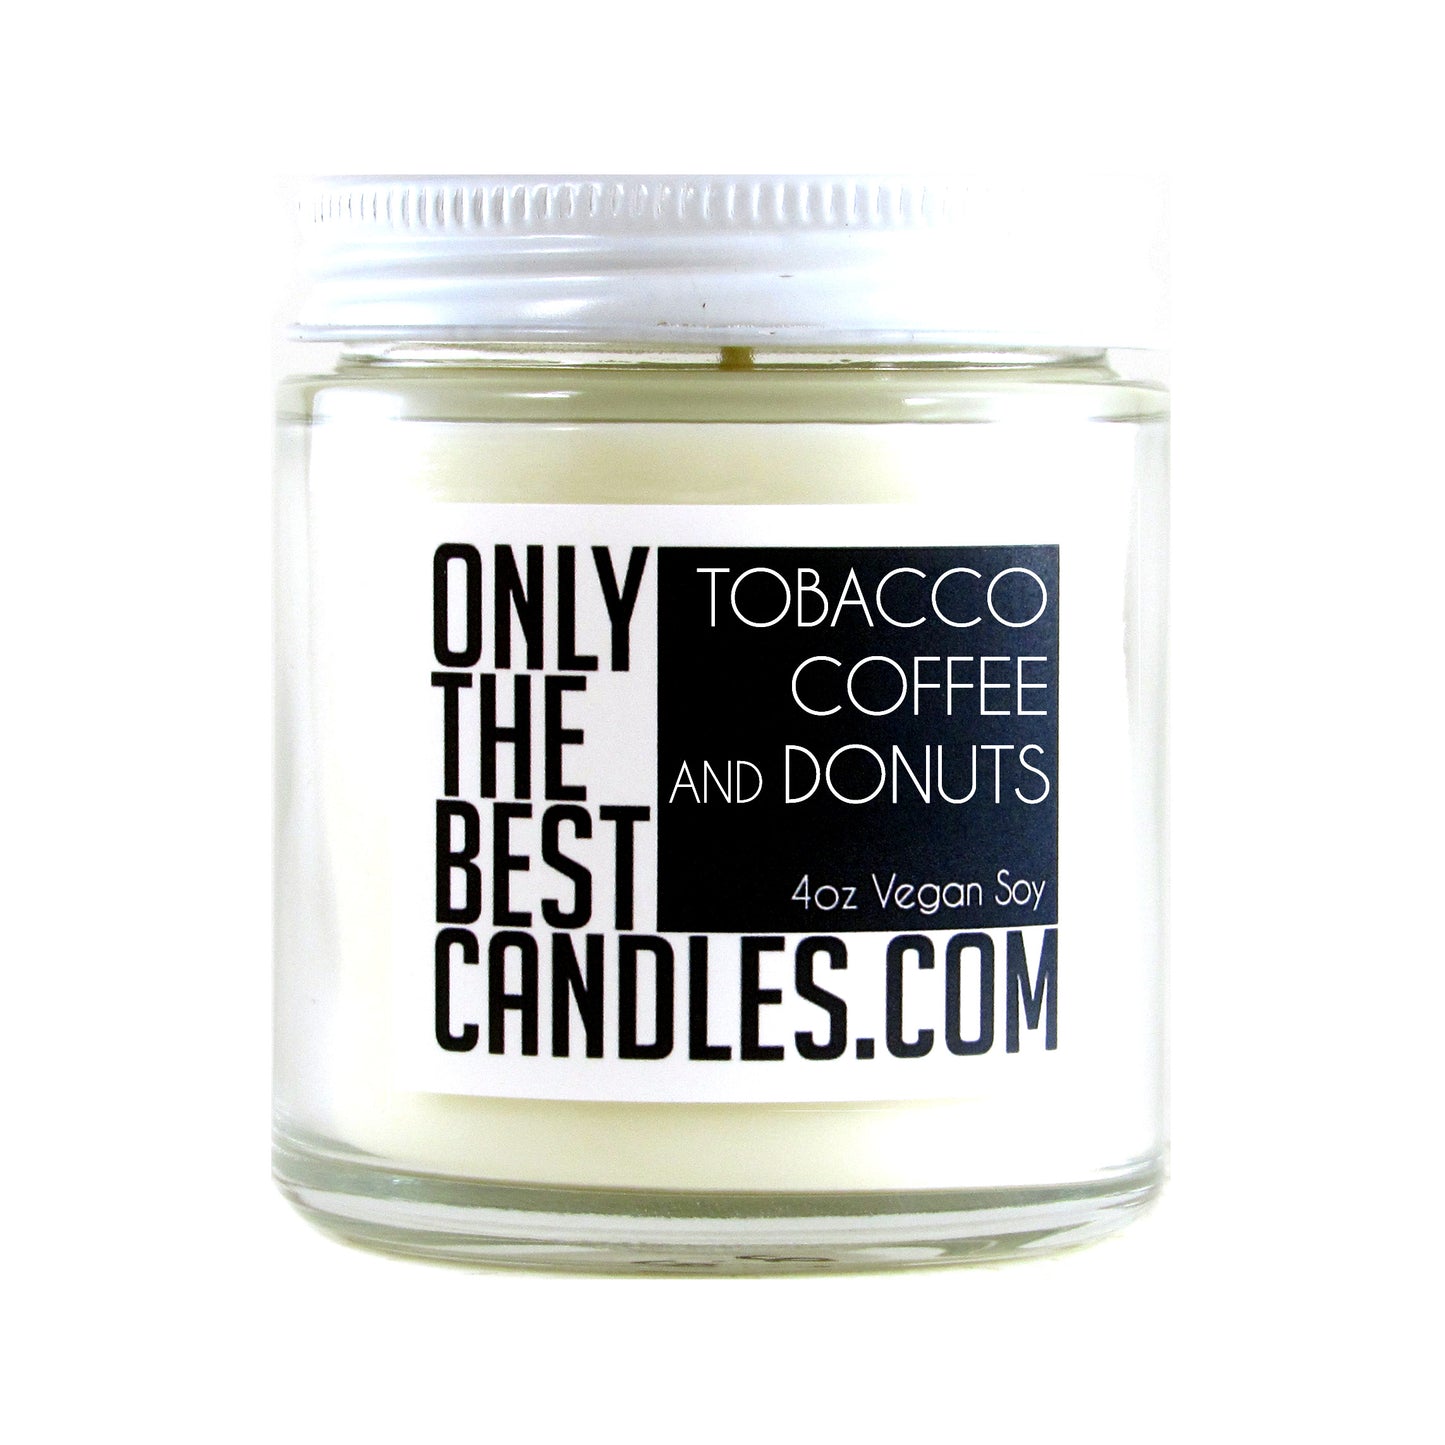 Tobacco Coffee and Donuts 4oz Candle